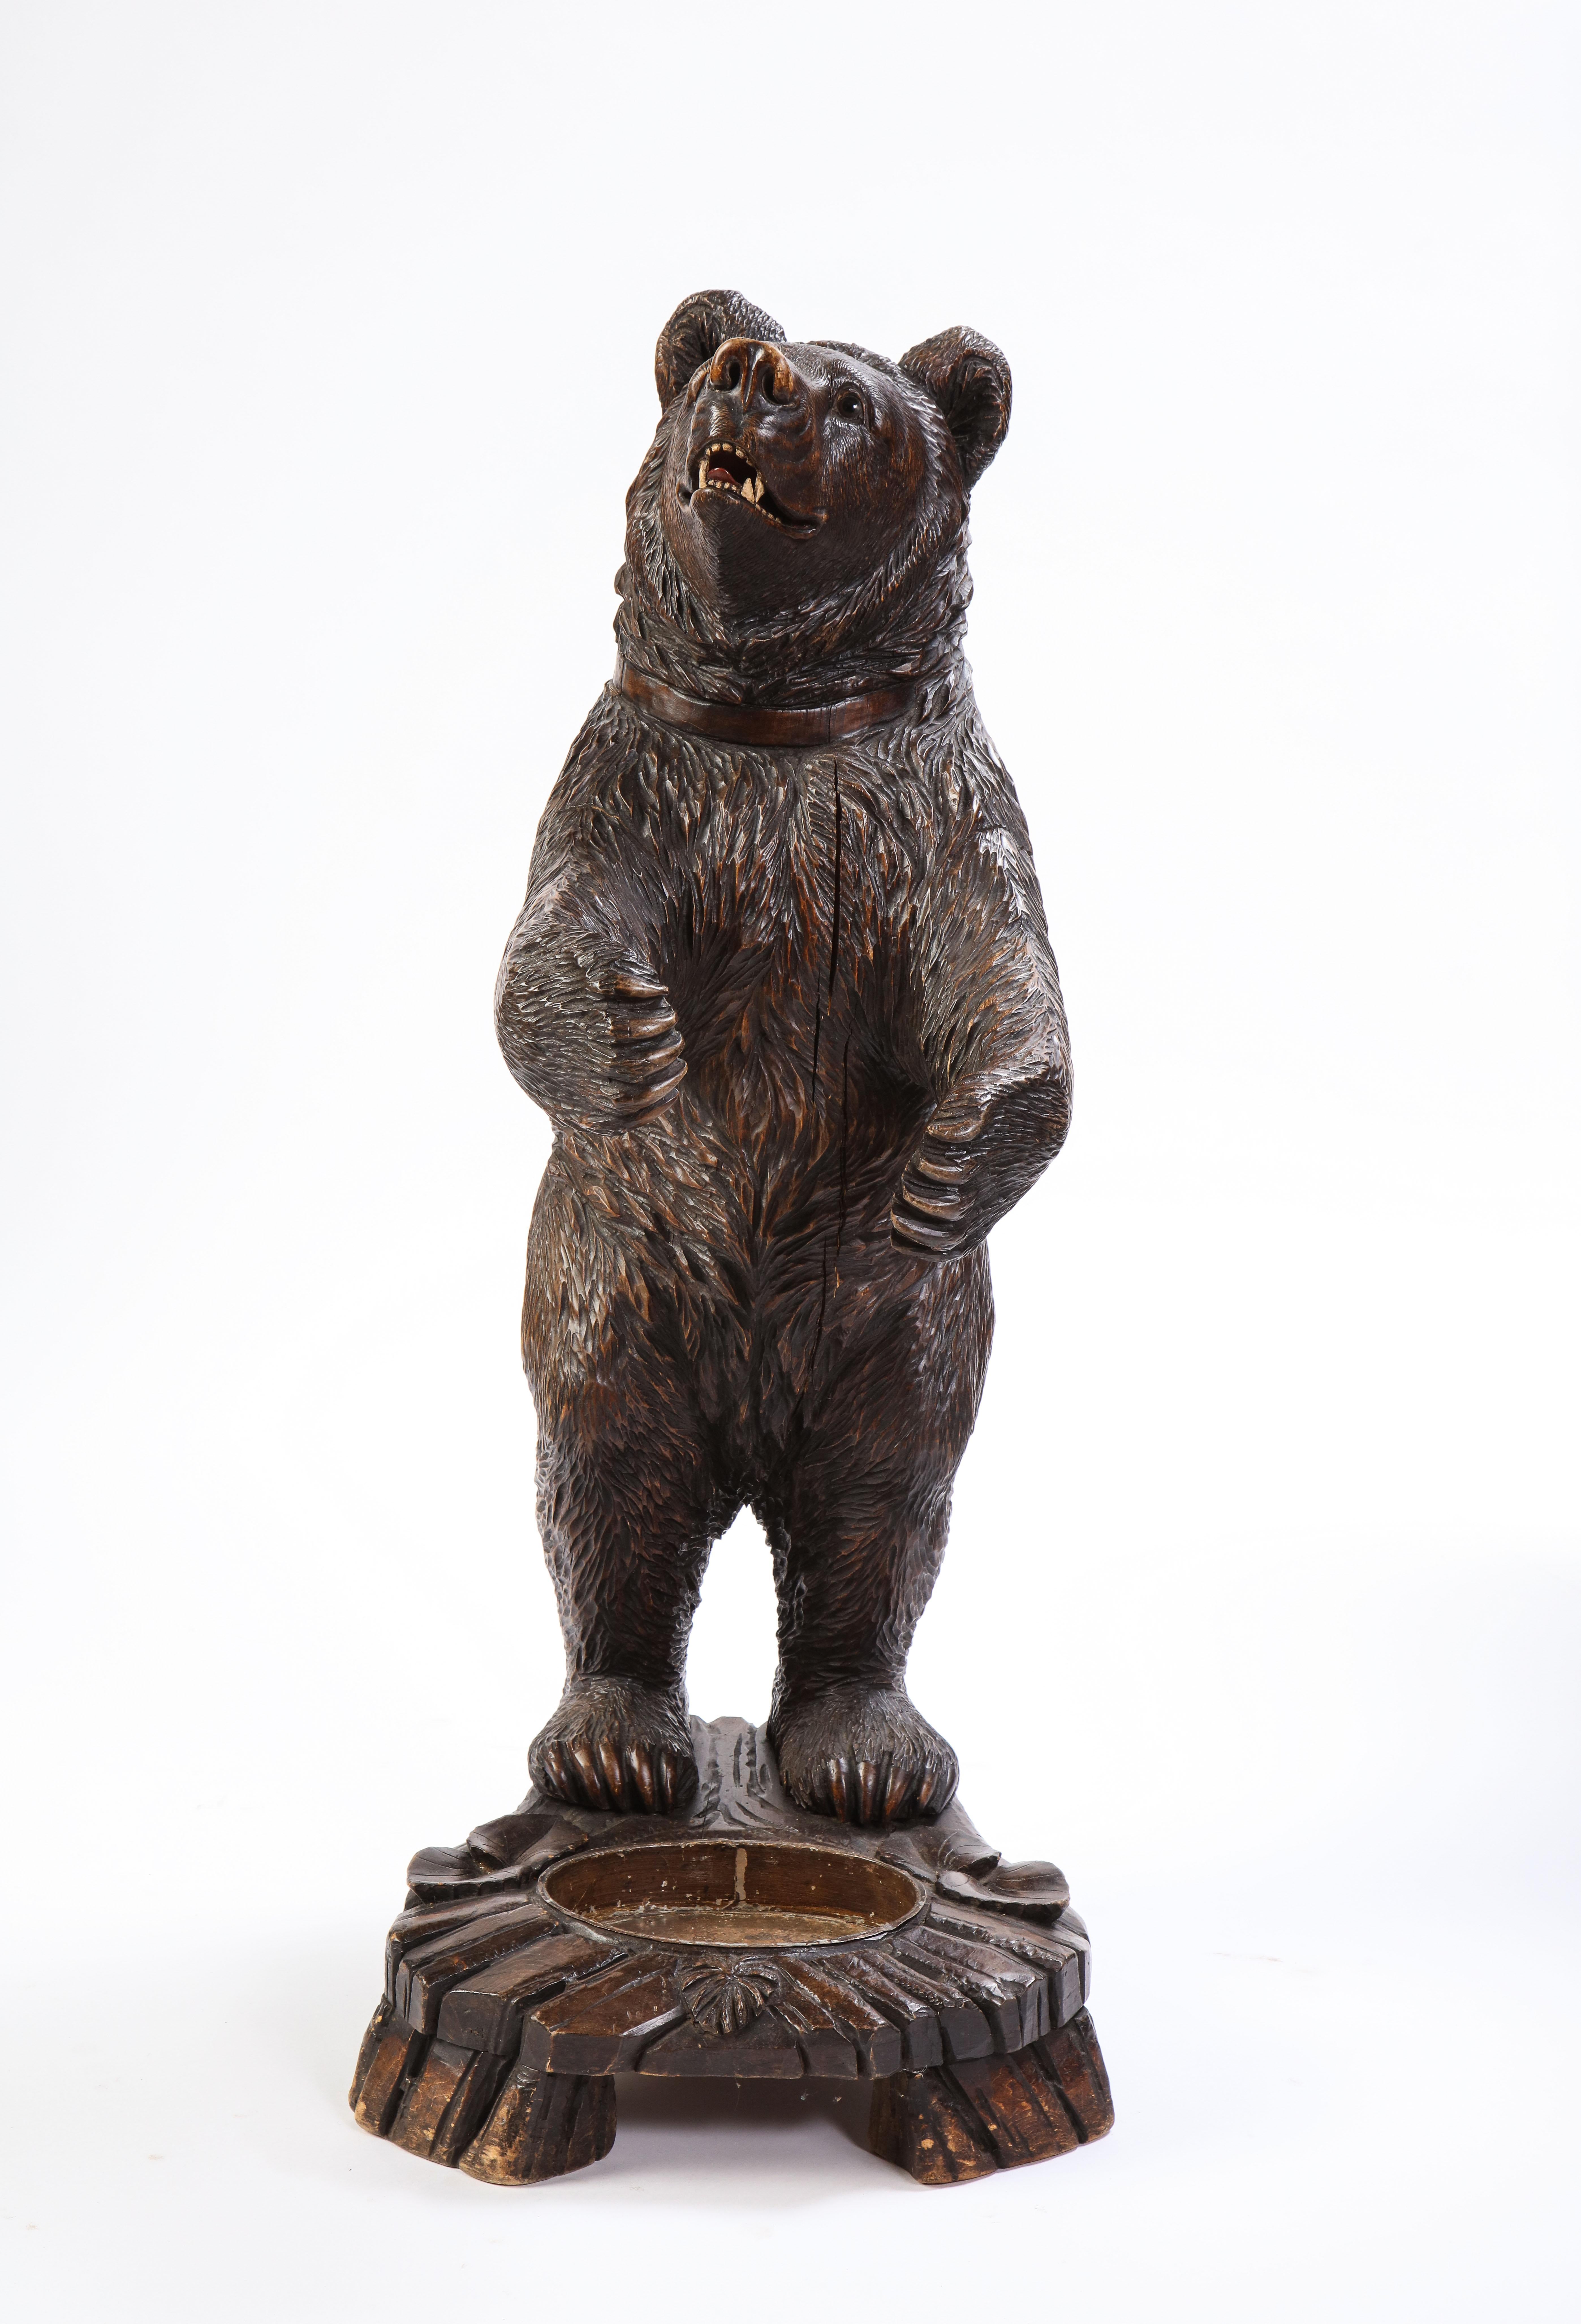 A playful Swiss 'Black Forest' stick or umbrella stand, early 20th century. In the form of a charming bear with inset glass eyes. Arms outstretched in a hug-like form the piece will fit perfectly in a front foyer or boot room. With a metal liner at